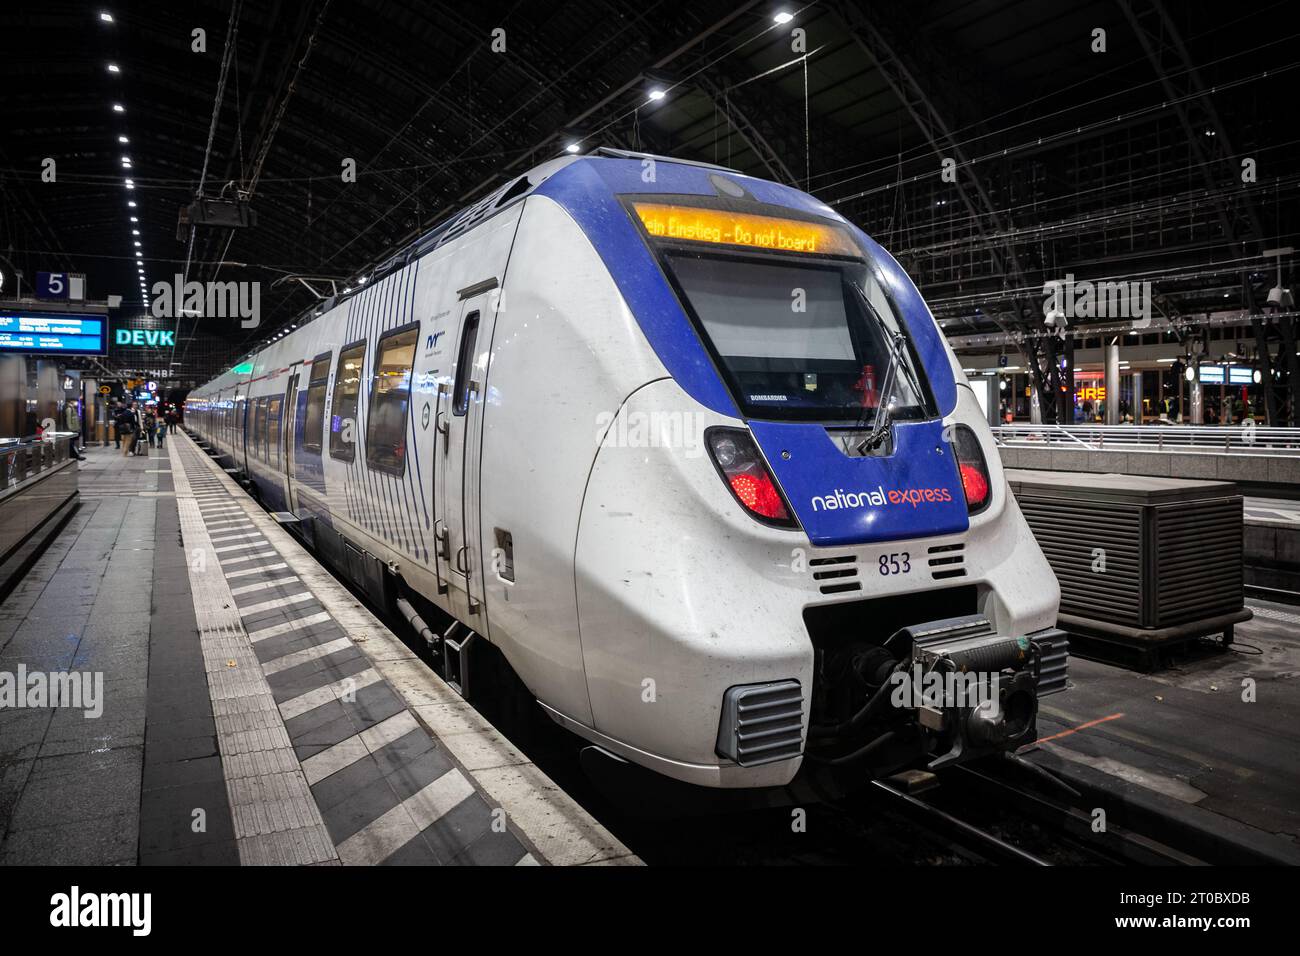 Picture of a National Express train in Cologne Train station. National Express is an intercity and inter-regional coach operator providing services th Stock Photo